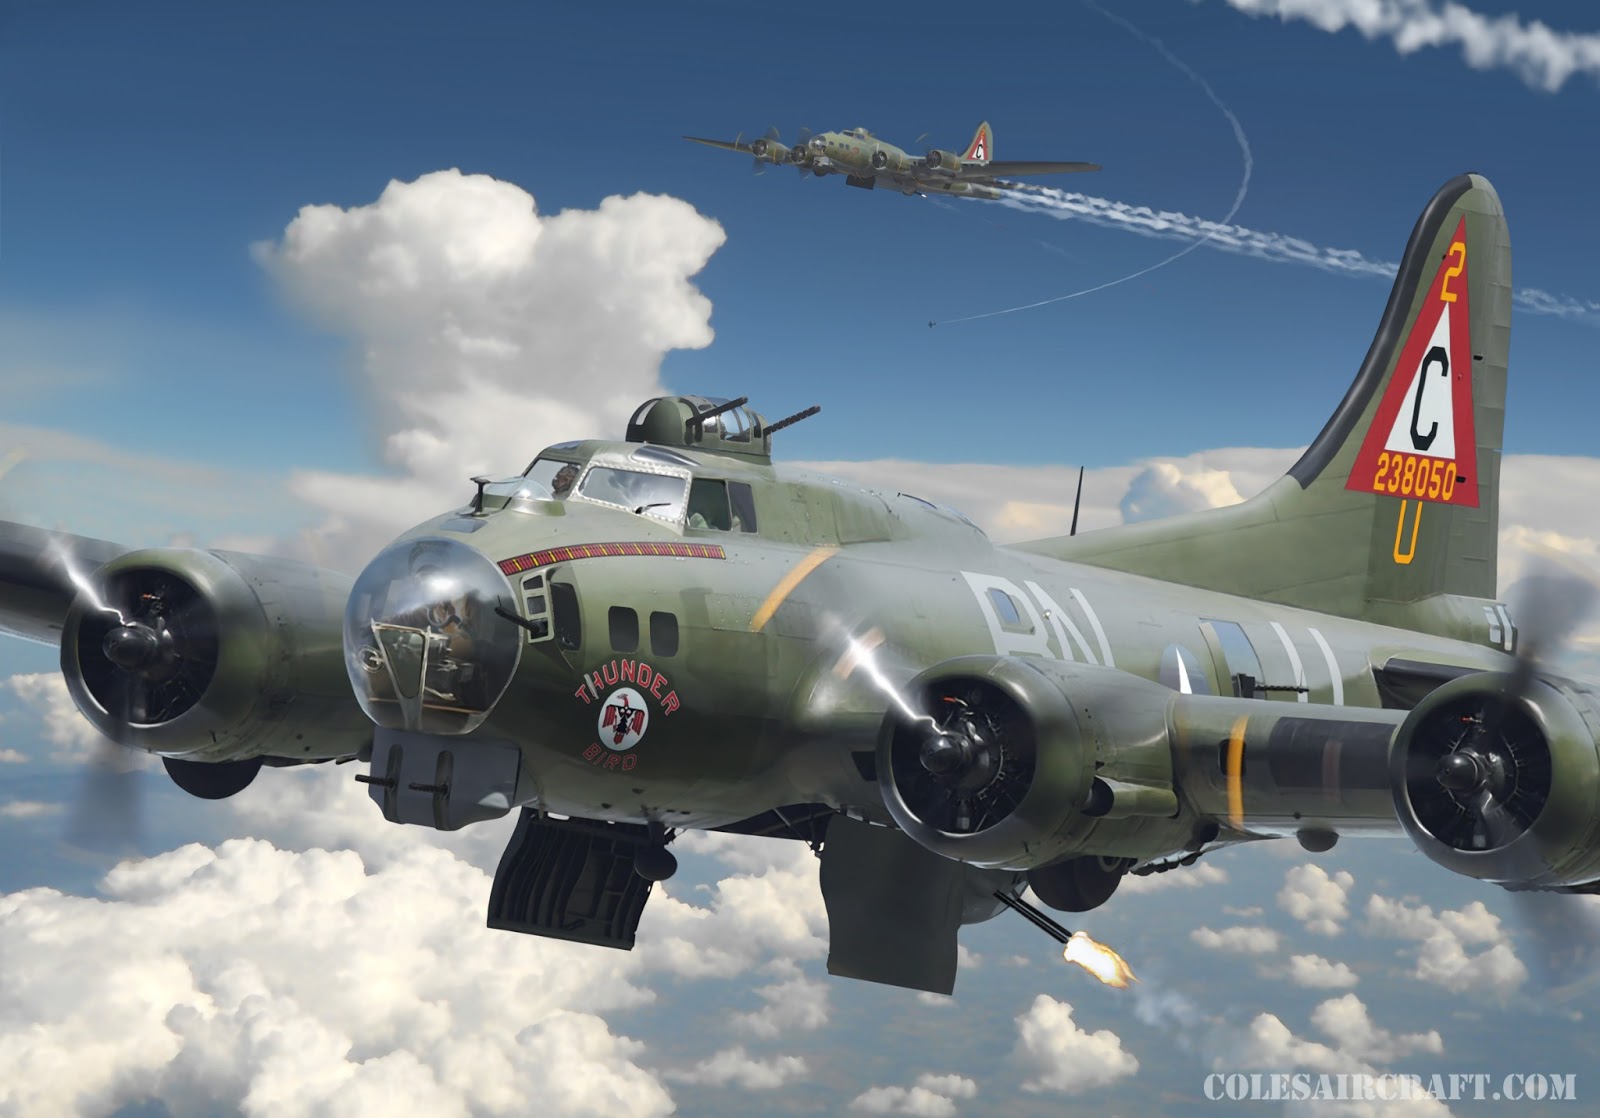 General 1600x1118 Bomber airplane Boeing B-17 Flying Fortress military aircraft watermarked American aircraft Boeing